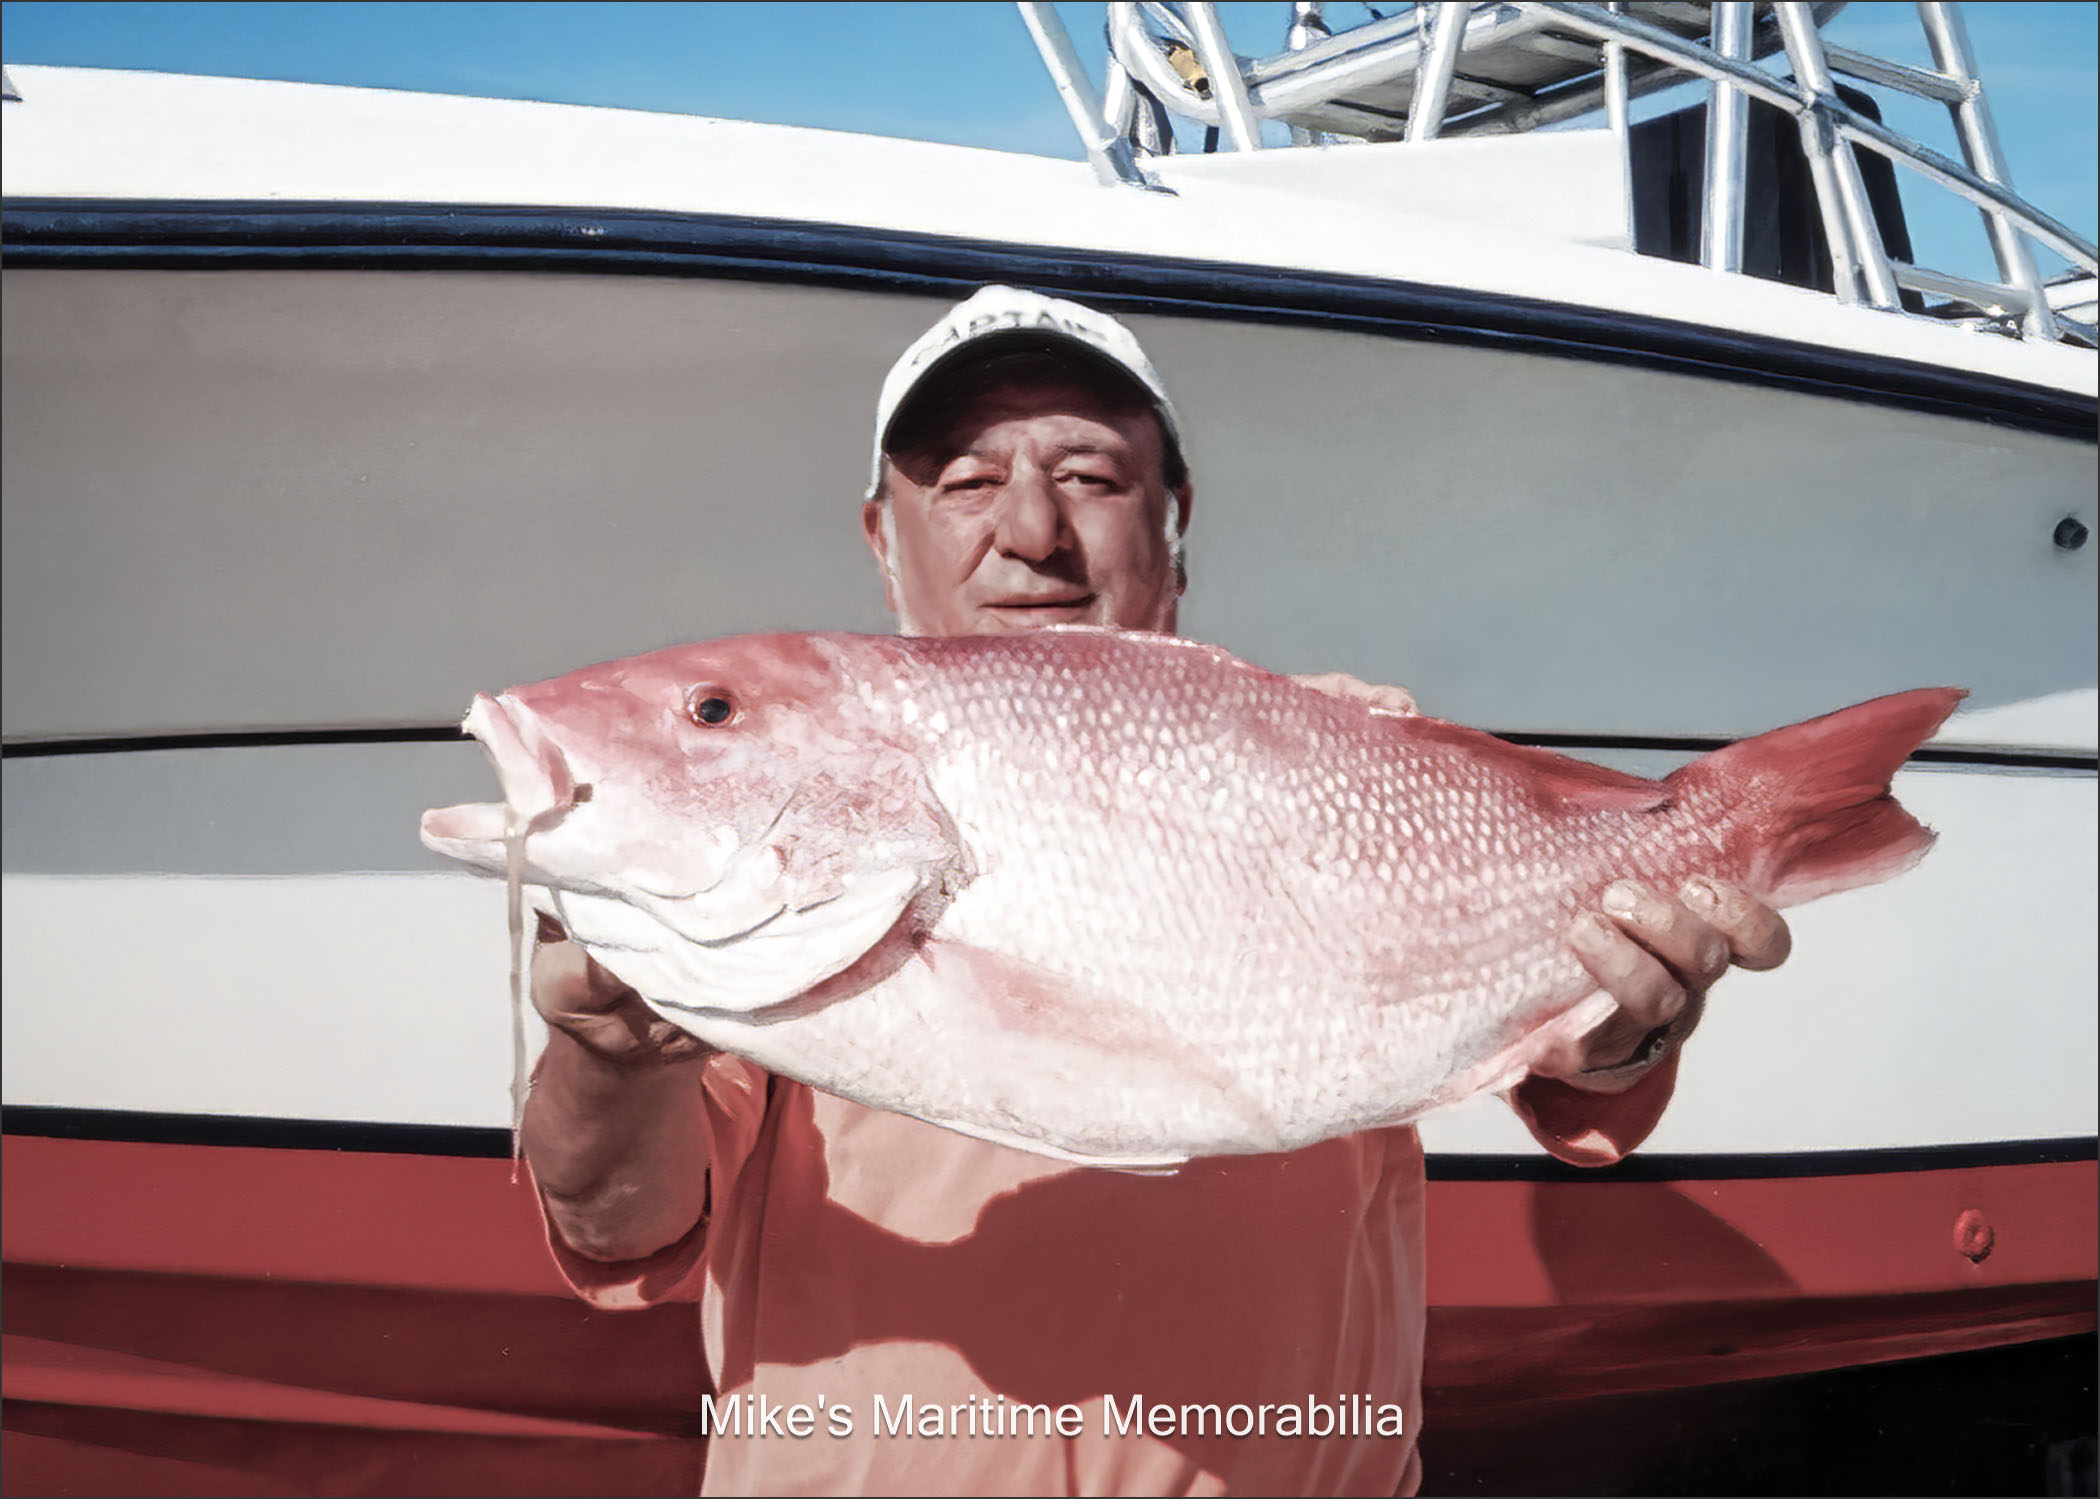 Captain Mickey fishing in Florida Captain Mickey with a really nice Red Snapper. The photo is courtesy of Captain Dave Bogan Sr.